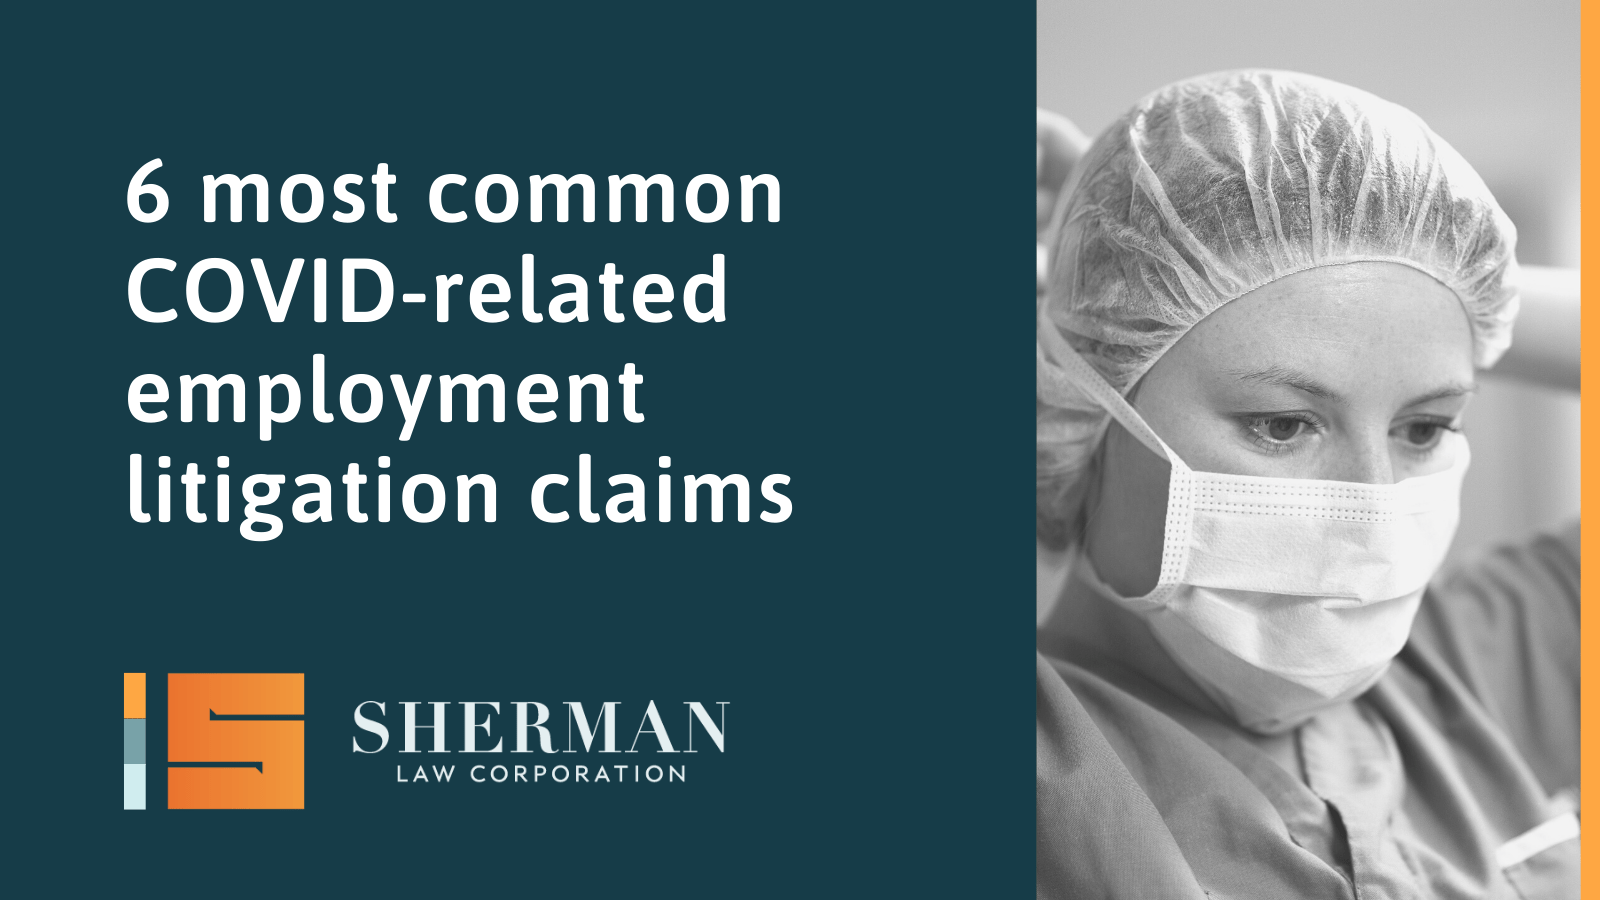 common COVID-related employment litigation claims - sherman law corporation